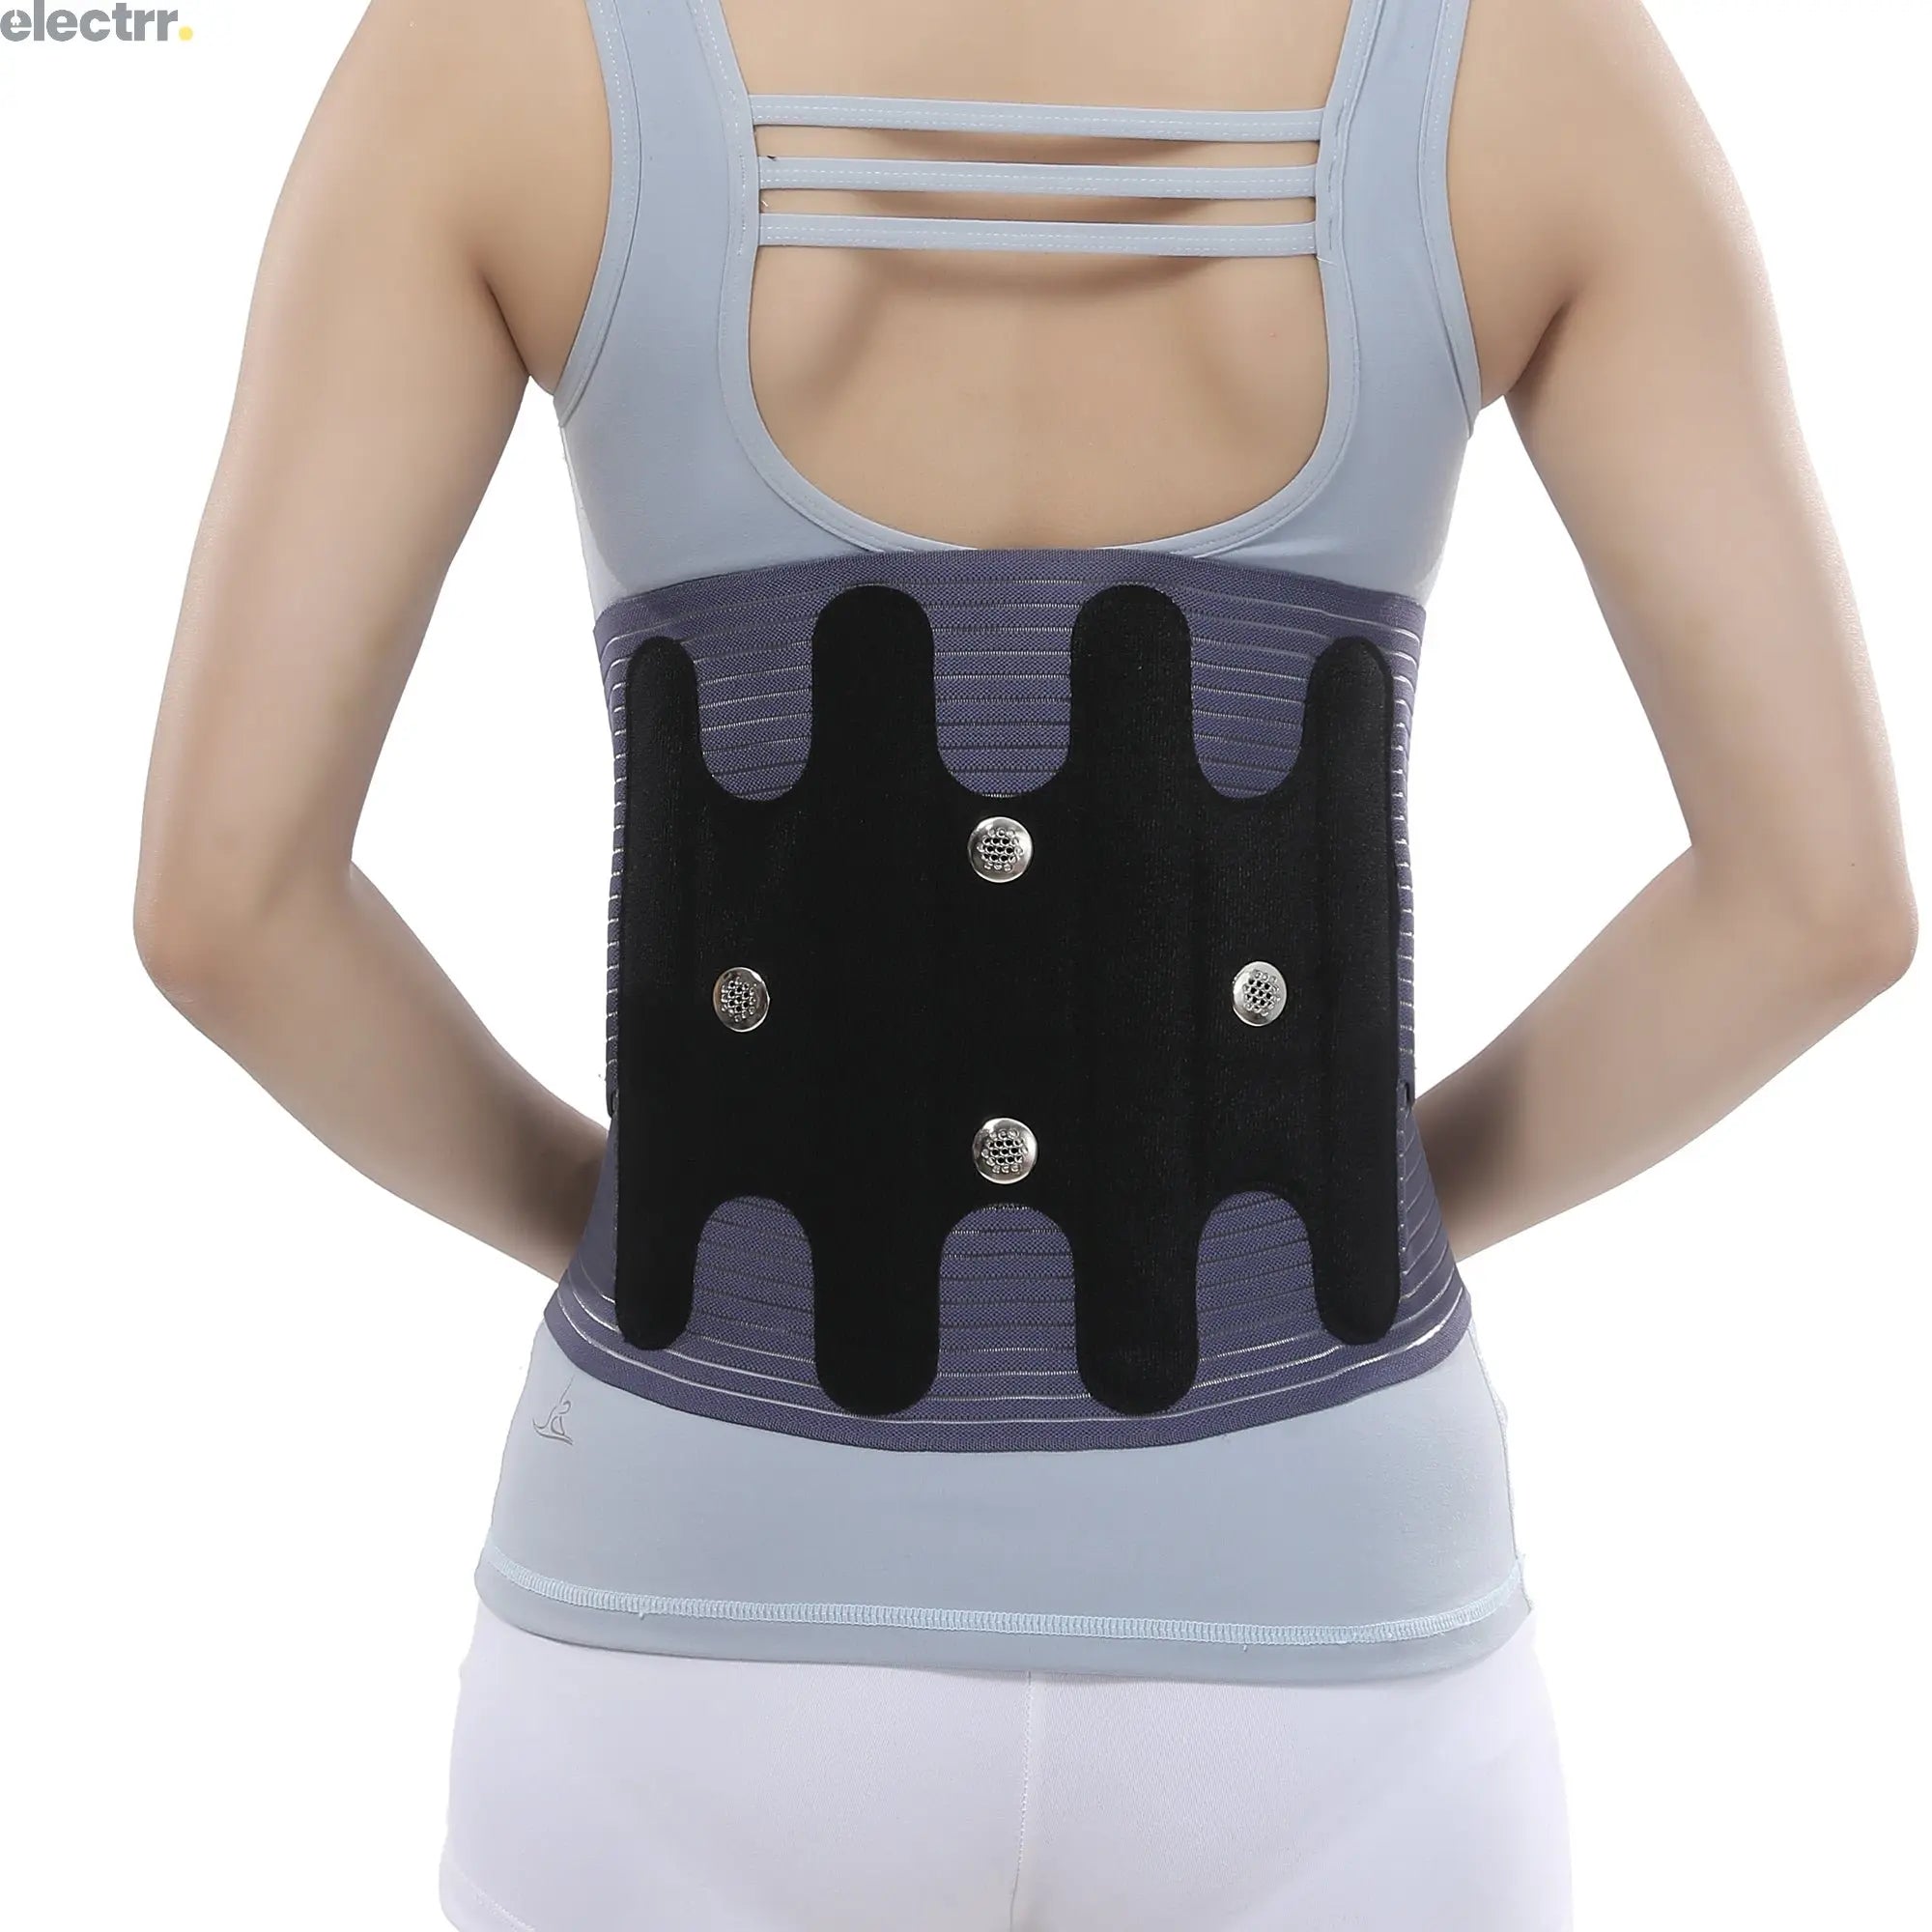 Buy Medical Device All Products Available Waist Back Brace Lumbar Compression Support Belt With Air Pillow | Electrr Inc